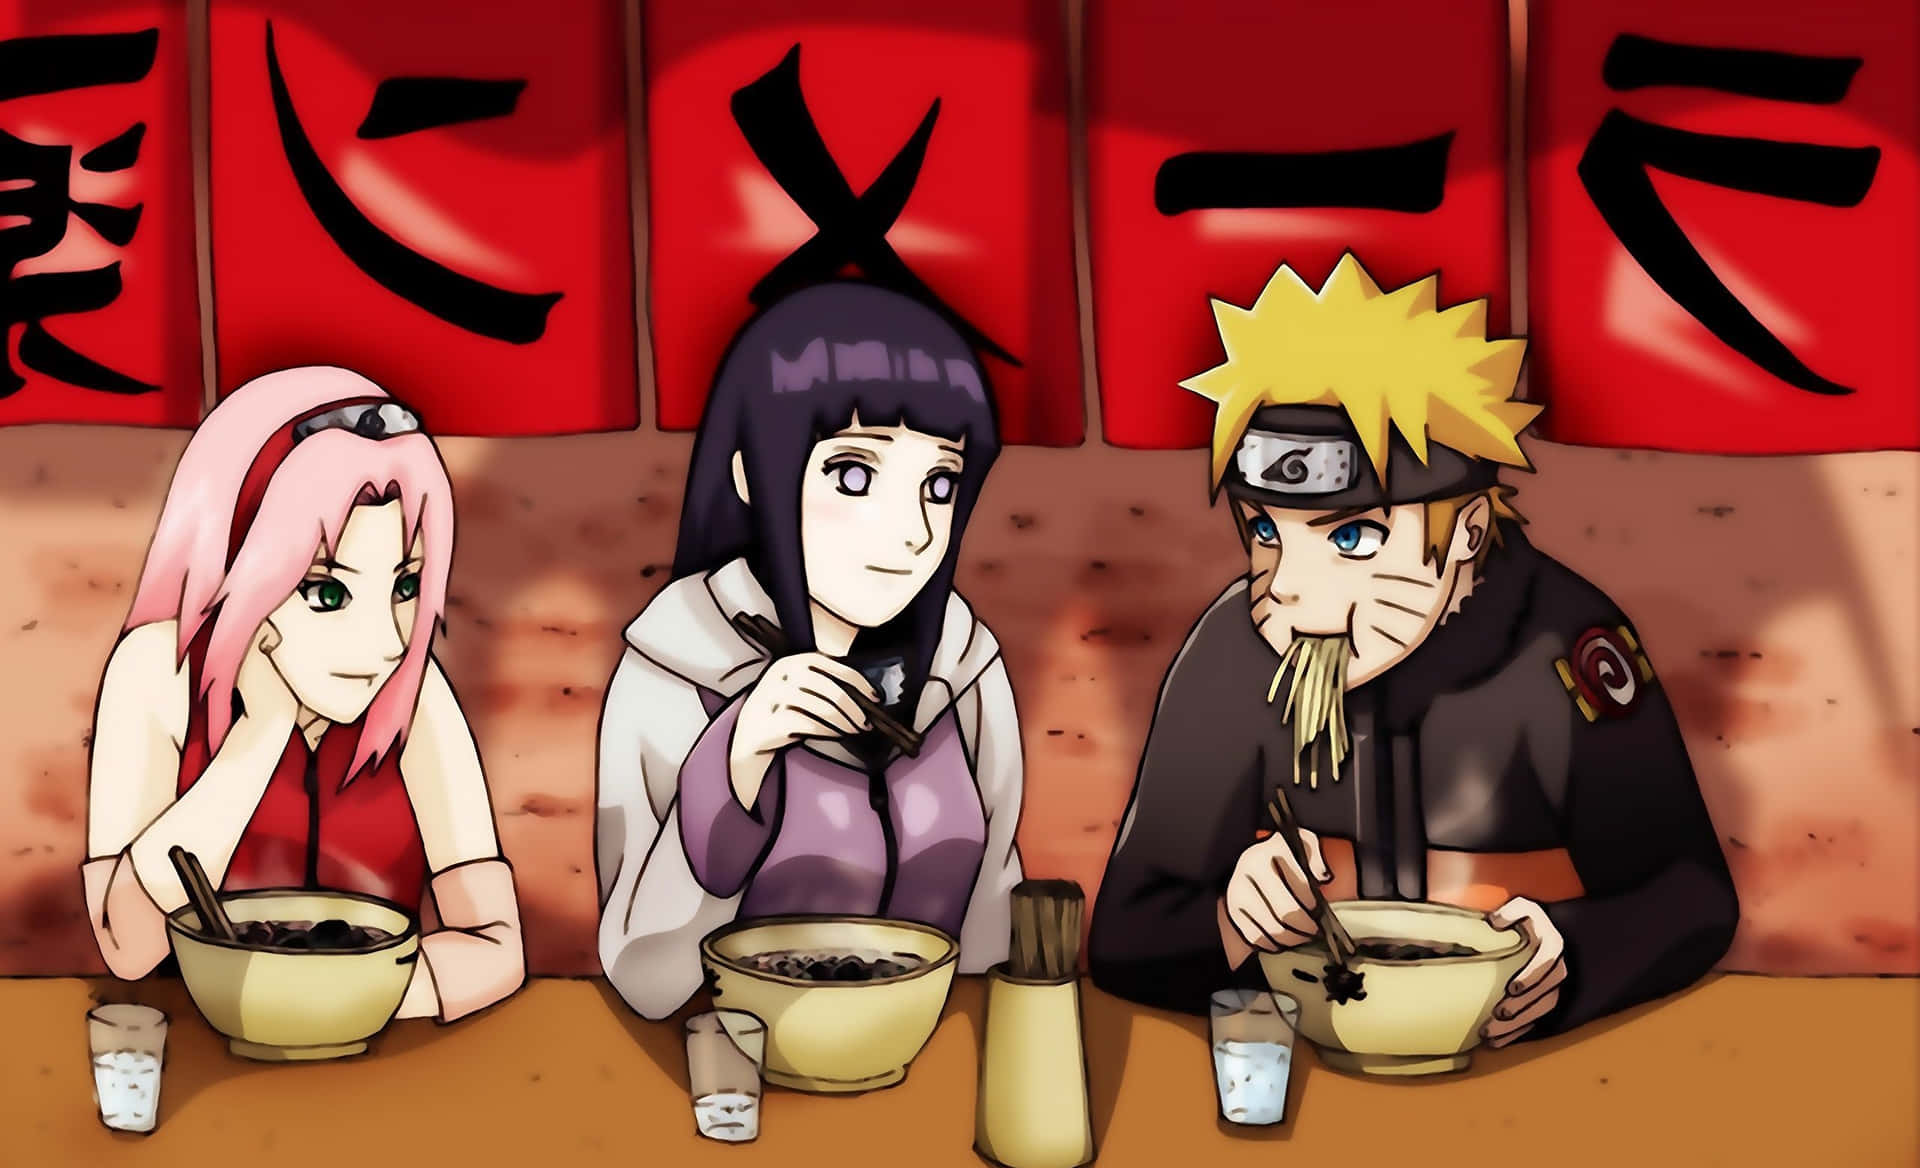 Naruto and his friends standing together, ready for action Wallpaper